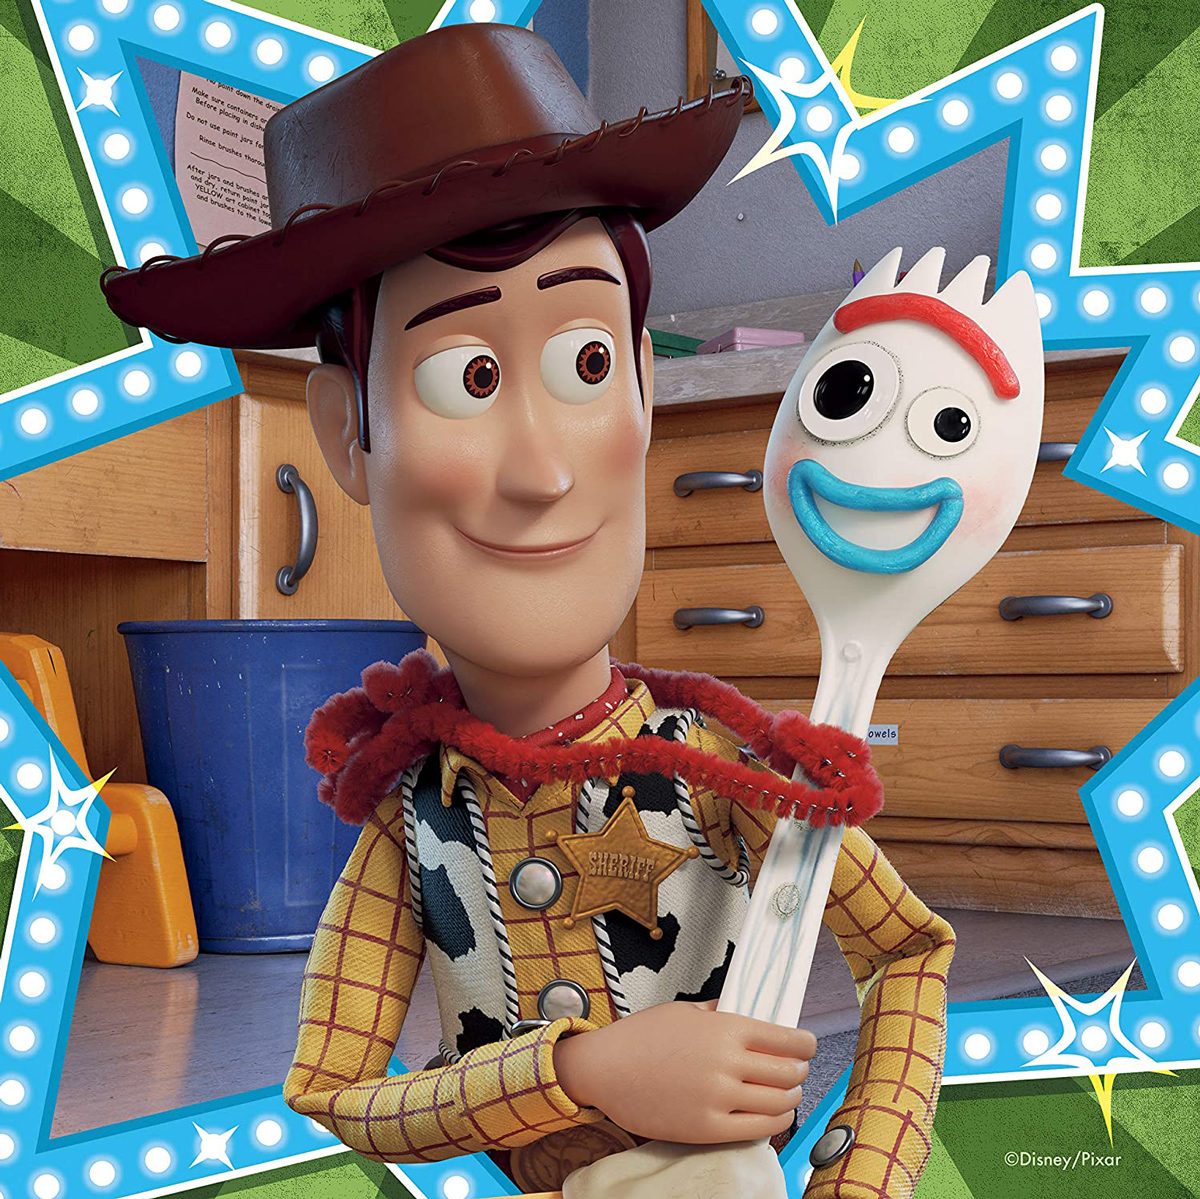 Toy Story 4 - In it Together!